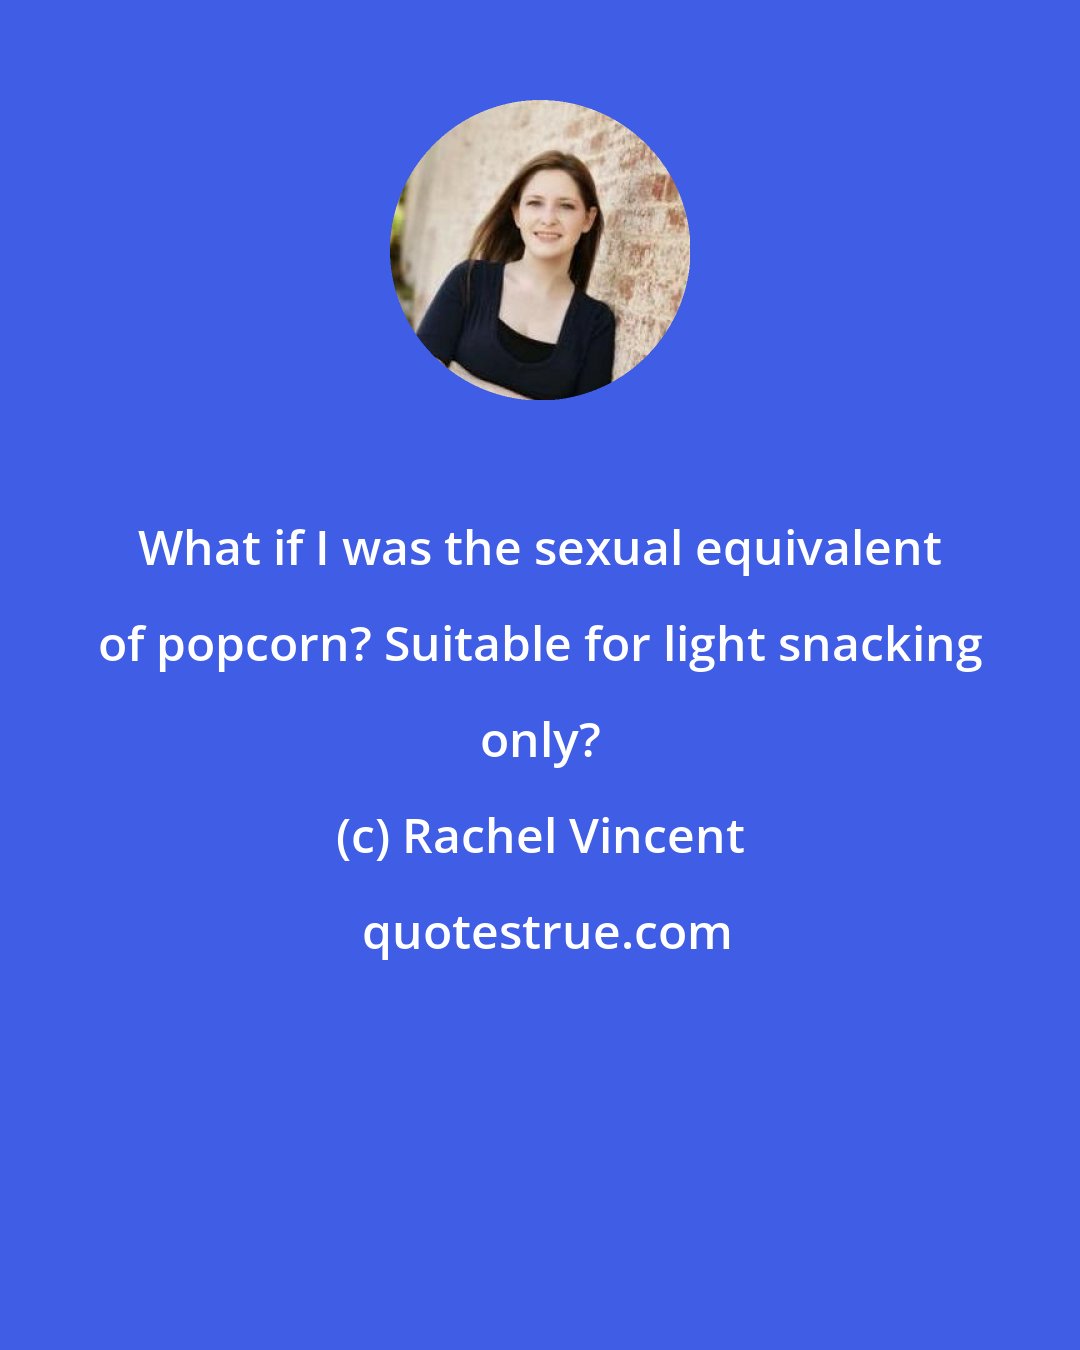 Rachel Vincent: What if I was the sexual equivalent of popcorn? Suitable for light snacking only?